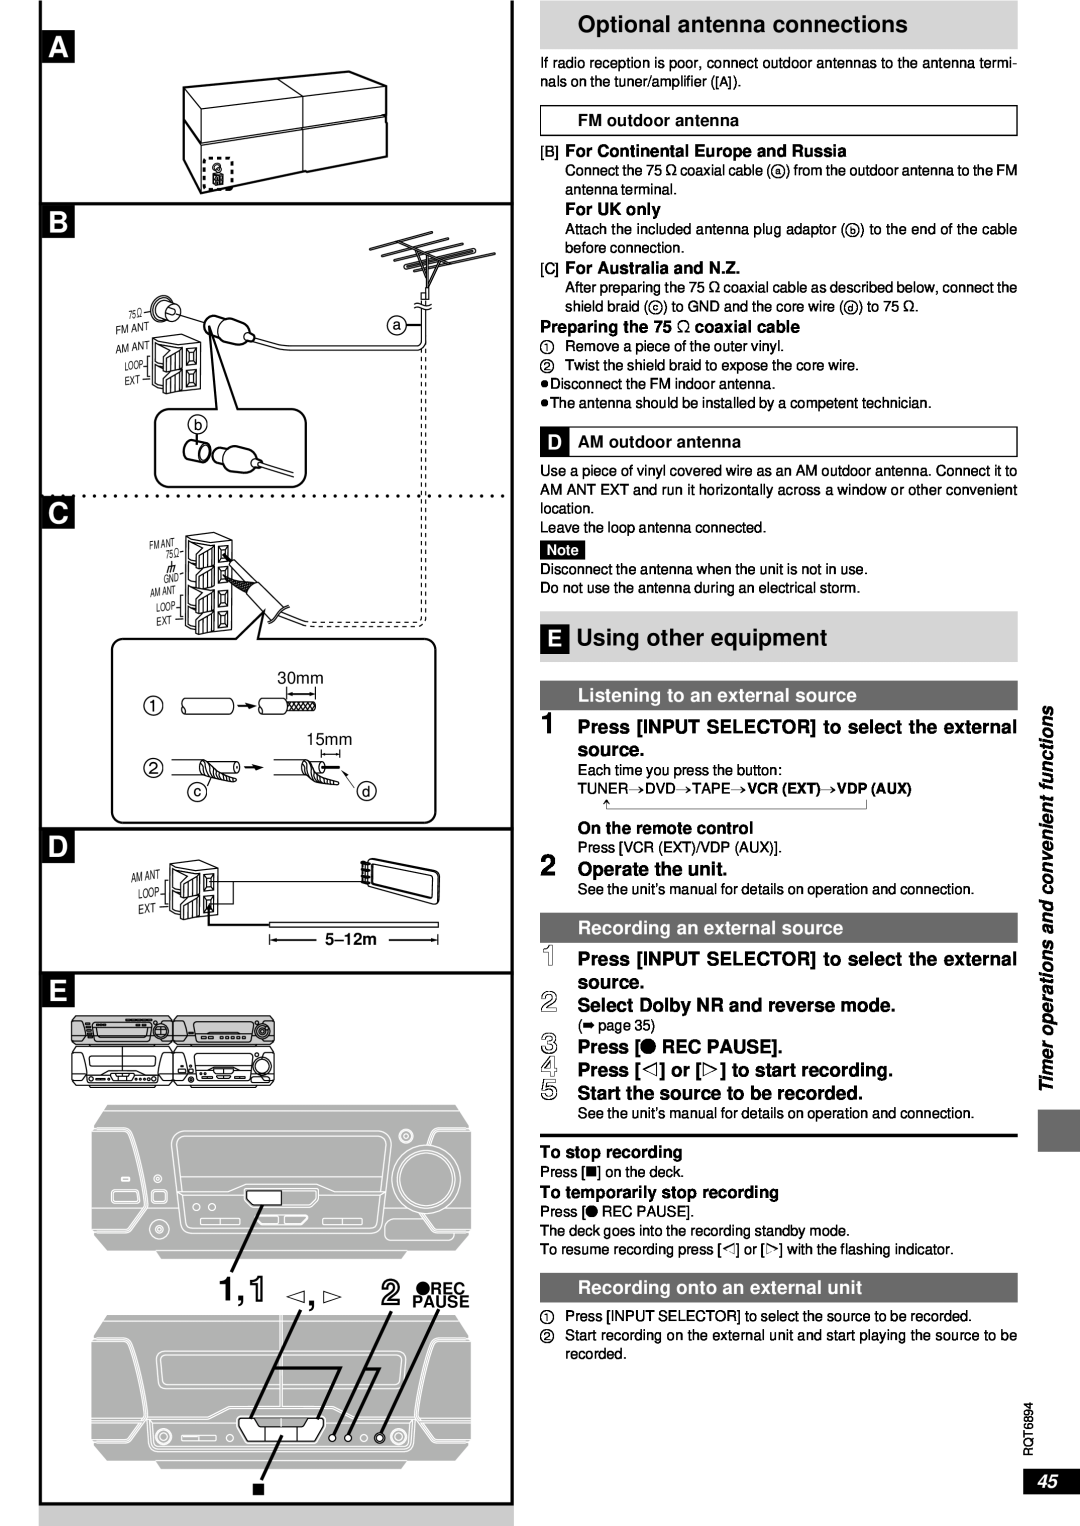 Technics SC-DV290 manual A B C D E, Optional antenna connections, E Using other equipment, source, Operate the unit, 5-12m 